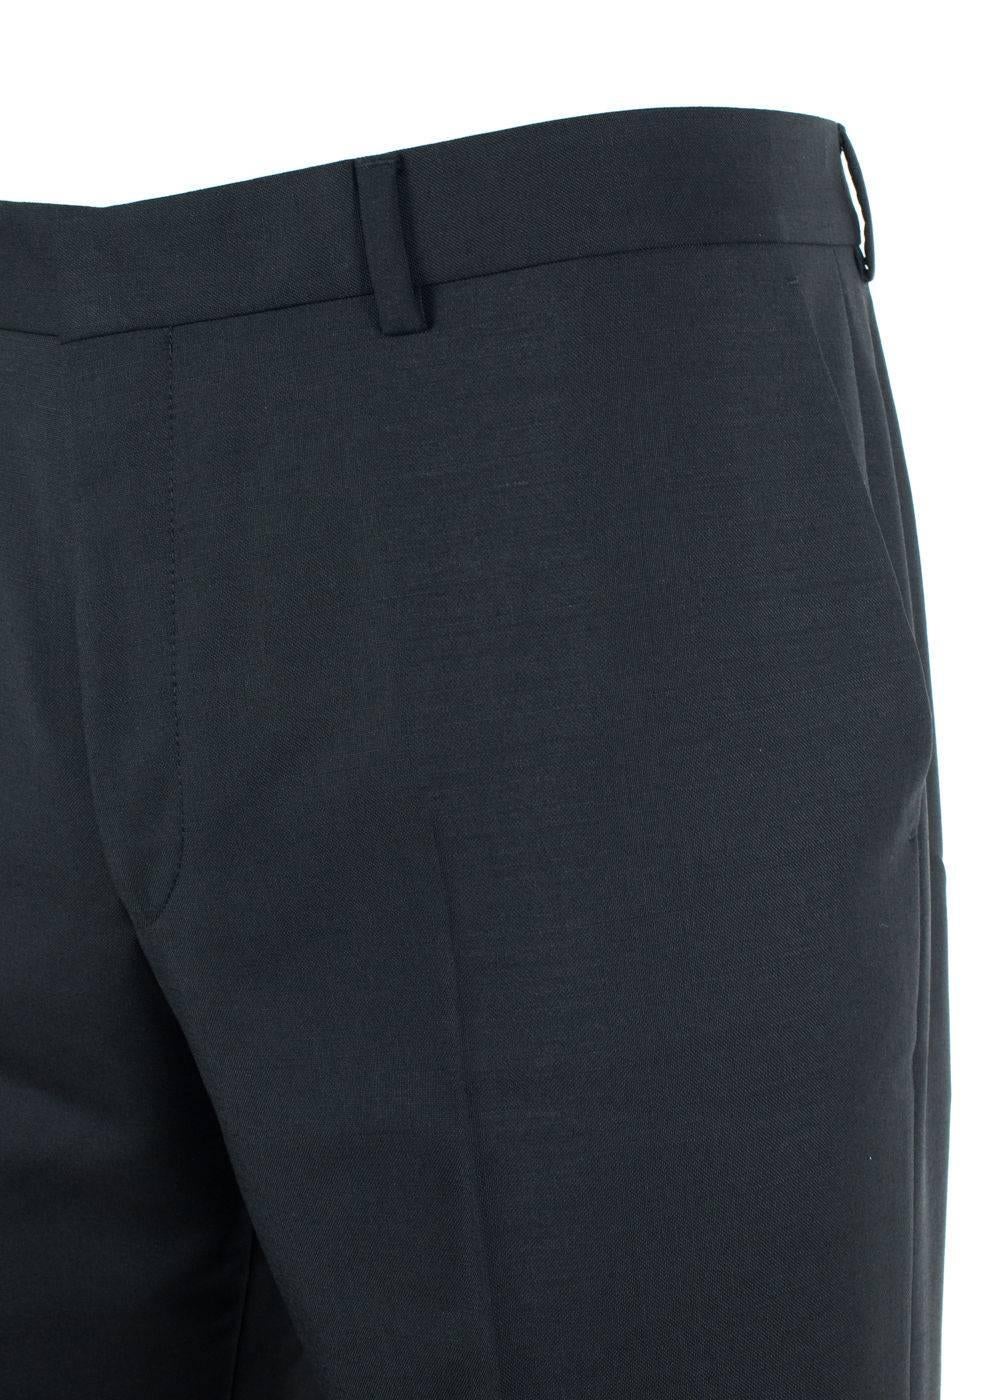 Brand New Givenchy Men's Trousers
Original Tags
Retails in Stores & Online for $495
Men's Size E54 / US38 Fits True to Size

Givenchy's classic black trousers made with wool blend textiles. Super classy and sophisticated for important occasions and